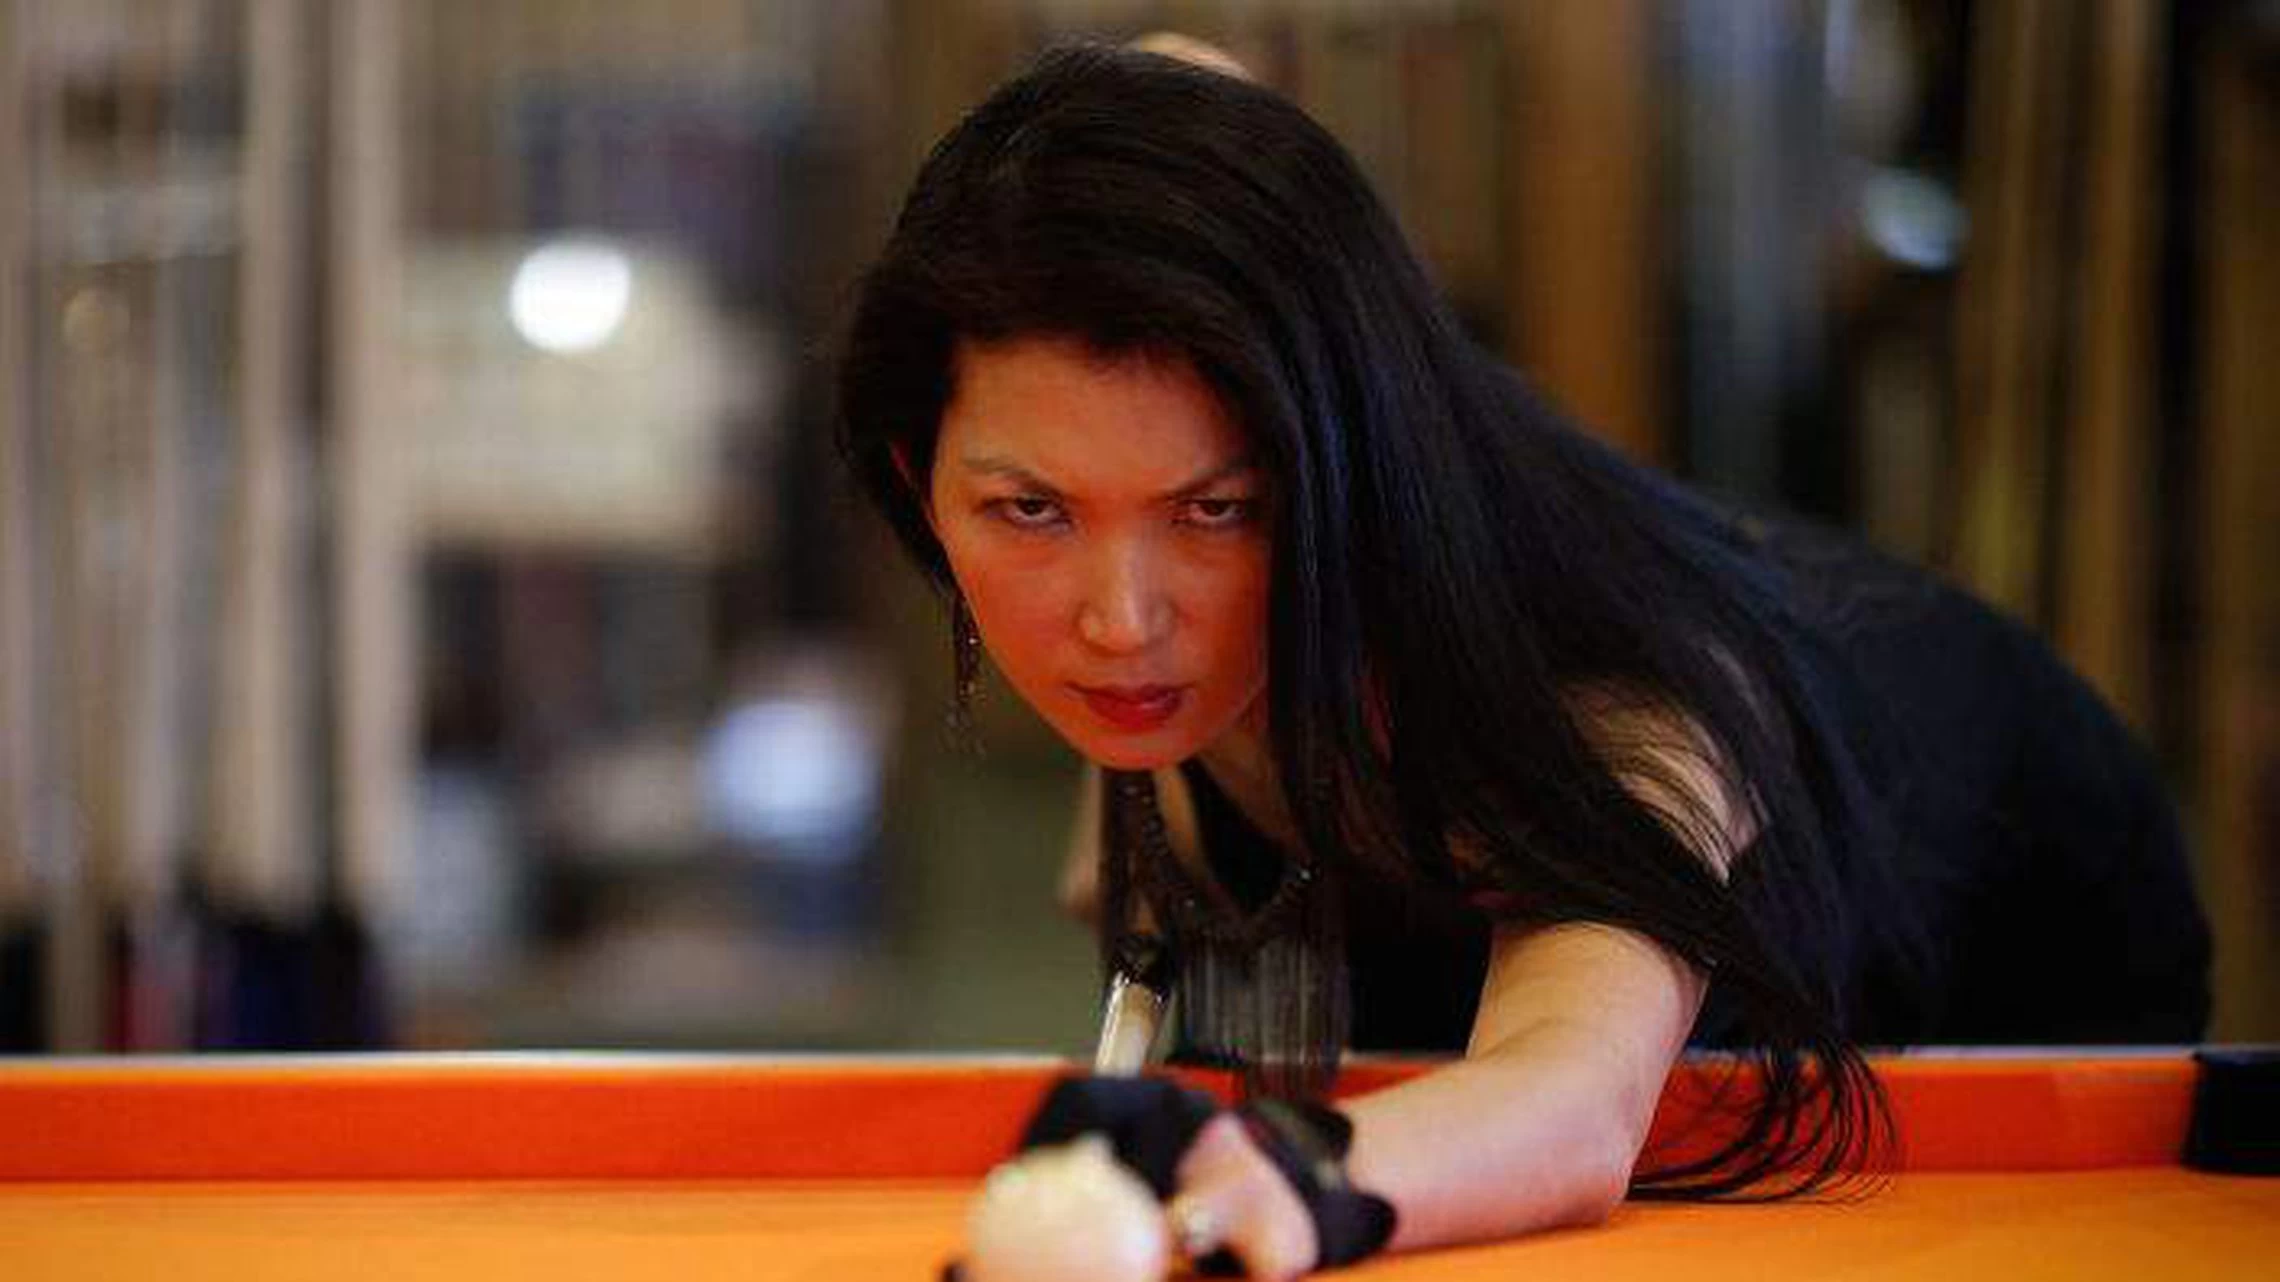 Billiards superstar Jeanette Lee diagnosed with stage 4 cancer